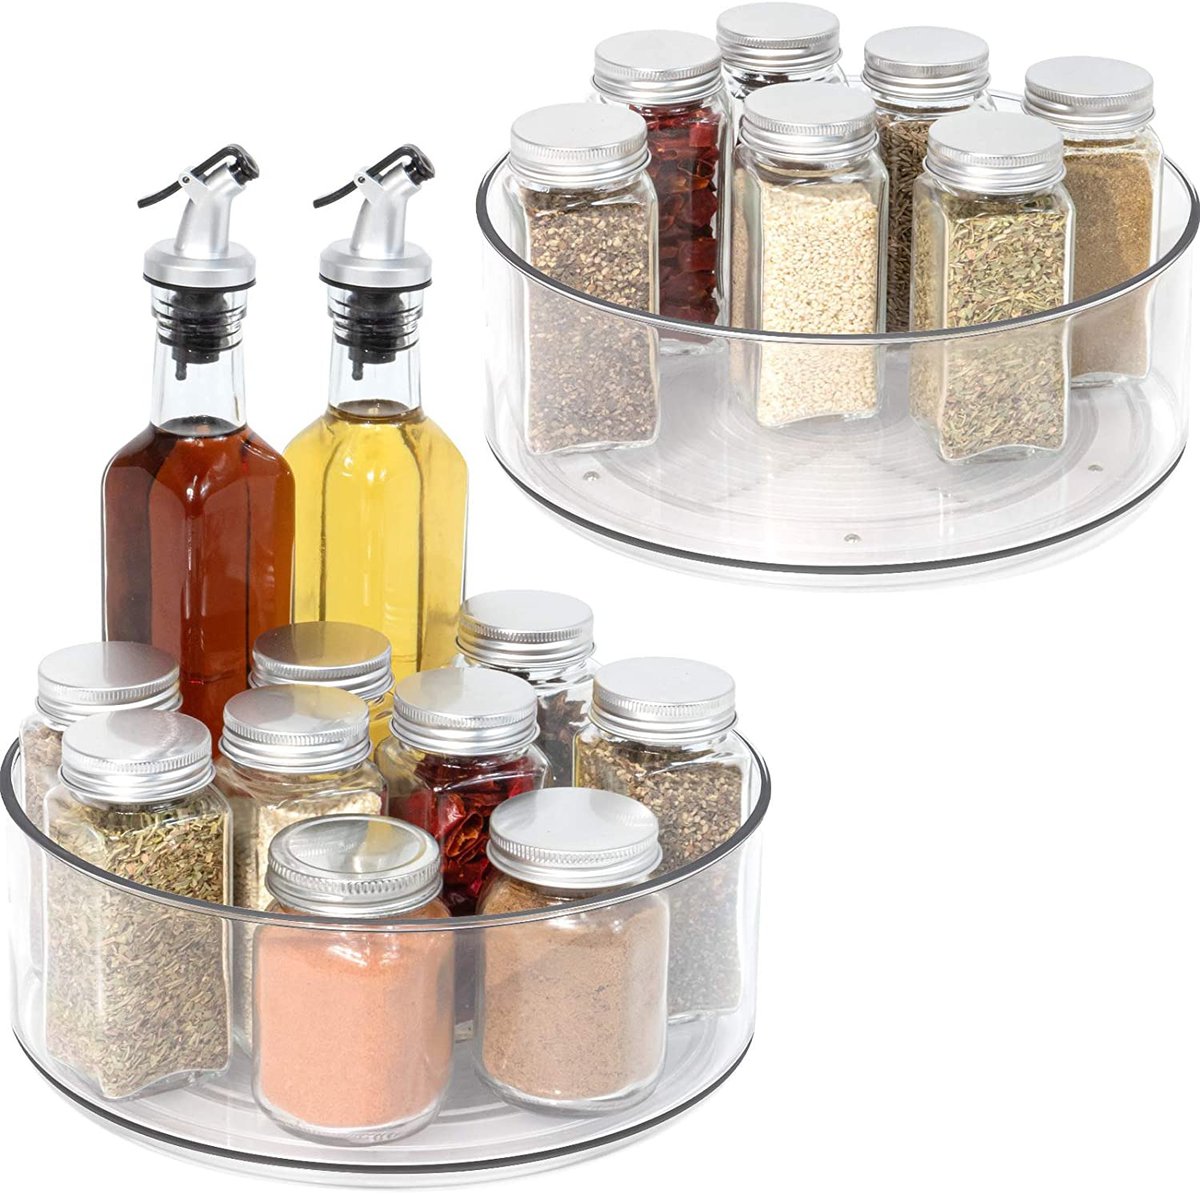 Pantry Organization Ideas - two clear plastic lazy susans filled with small jars of spices and two tall jars of oil and vinegar.